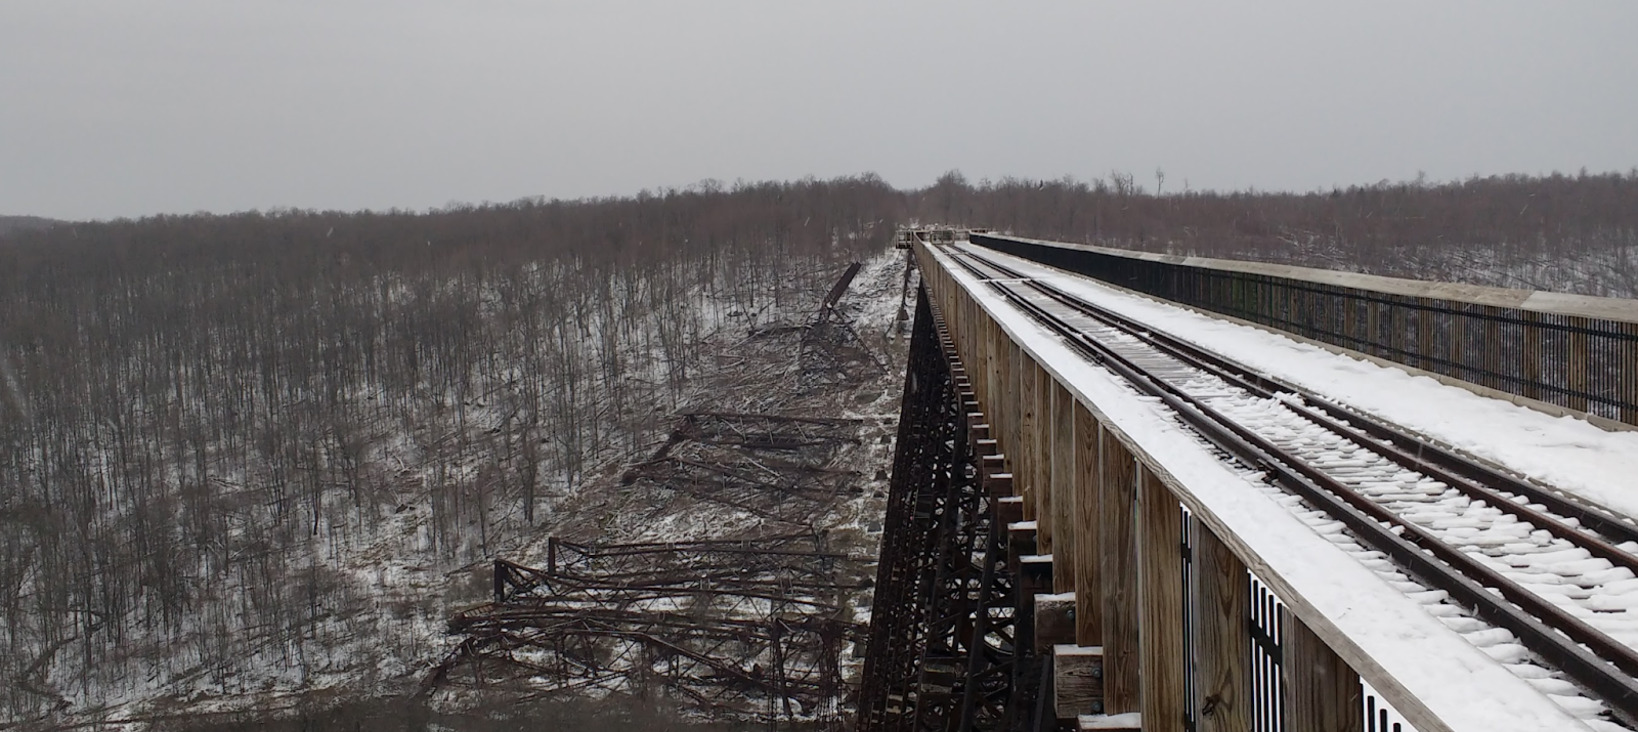 A photo of a bridge going into the distance over a valley in a winter landscape. About 50 meters ahead the bridge is collapsed with steel girders on the valley floor.